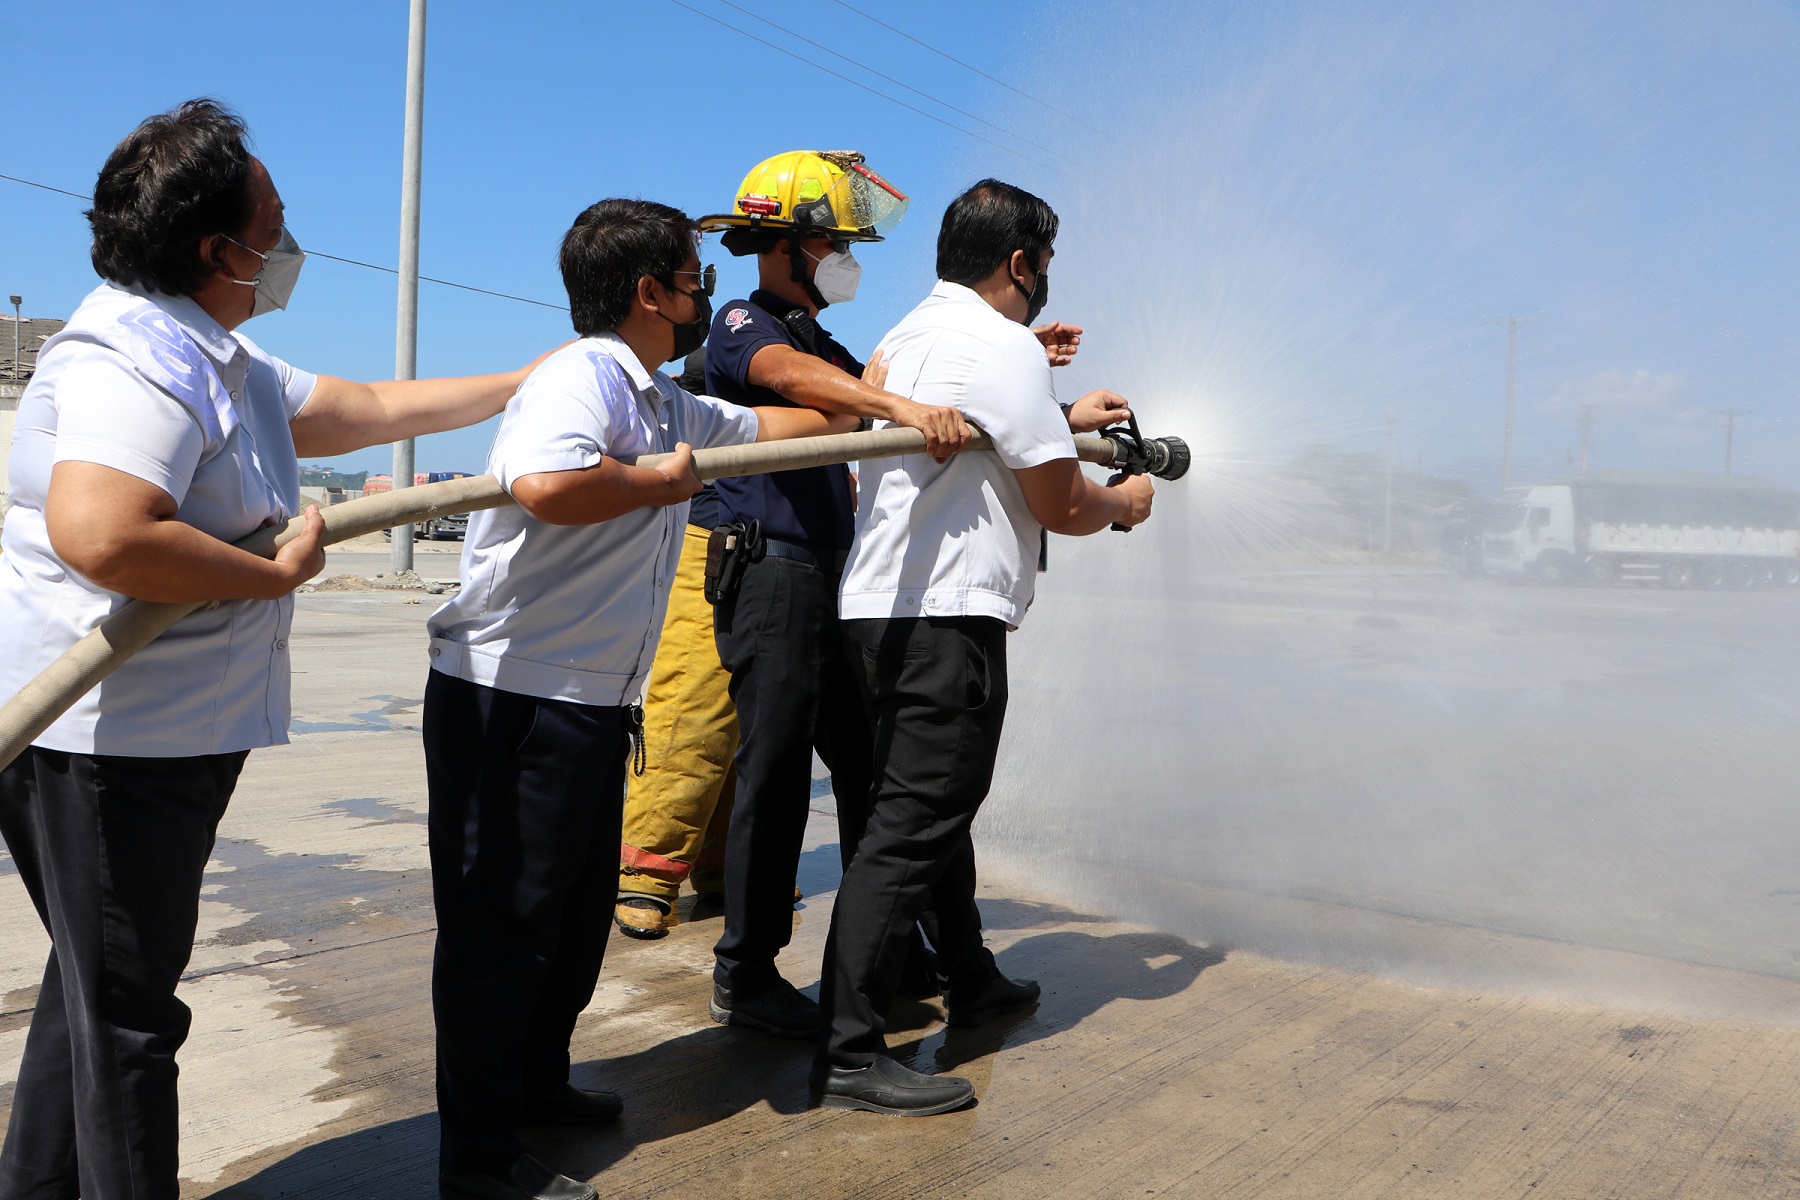 The SBMA Seaport department personnel, along with security and safety officers from various locators, conduct the Port Facility Fire Emergency Response Exercise 2022 at the Marine Terminal Port Facility, NSD Compound to test stakeholder responders’ skills and contingency plan in case of emergencies.